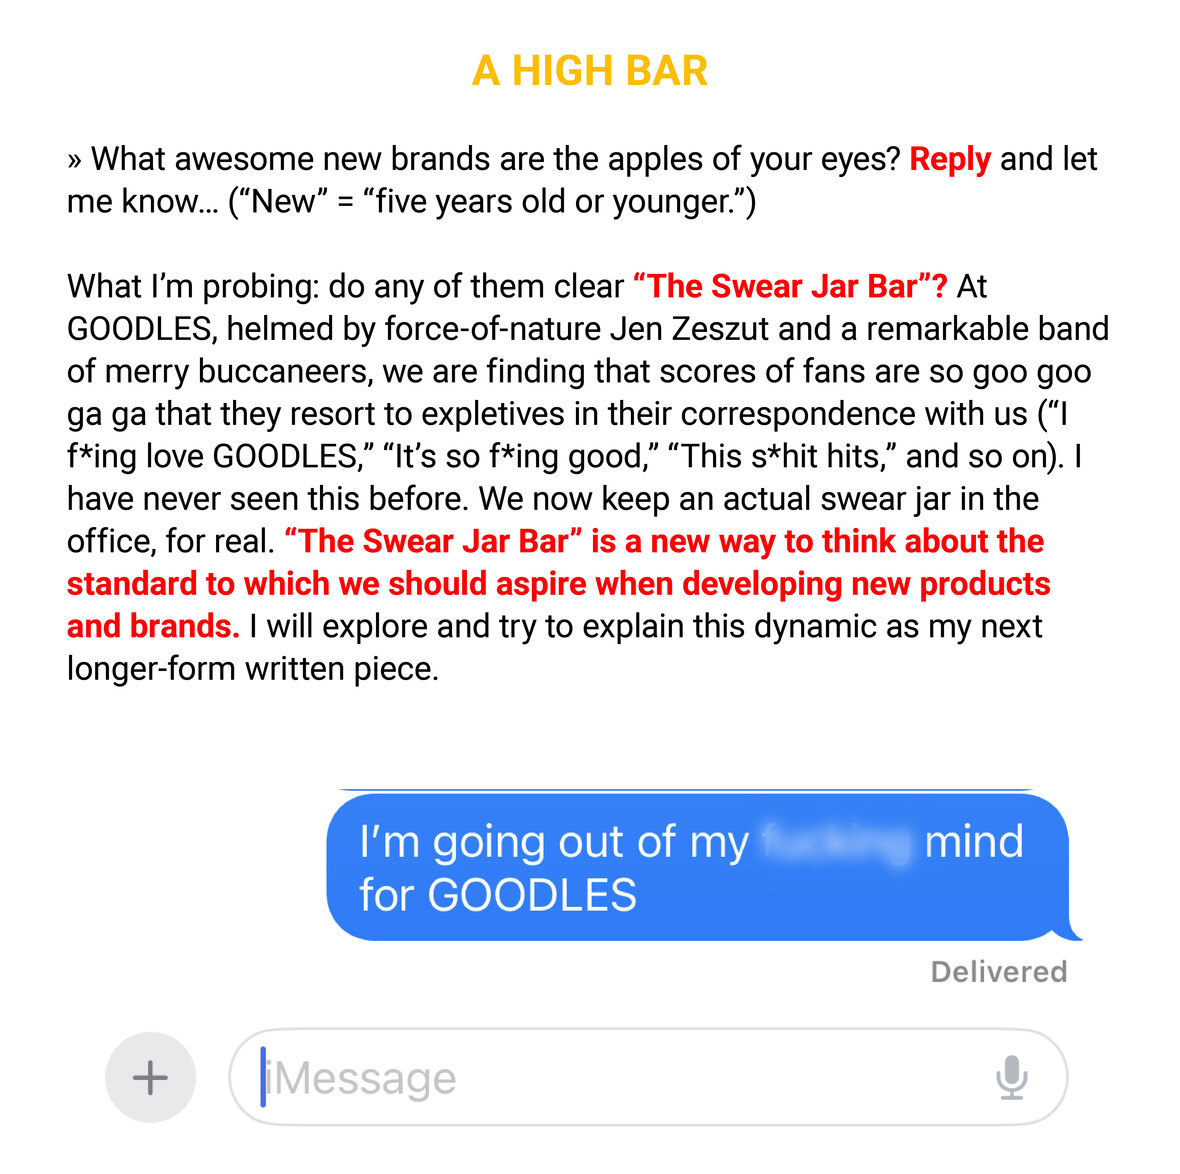 The image contains a screenshot of a text conversation, overlaid with a title "A HIGH BAR" in red at the top. The conversation starts with a message asking about new brands that have caught attention, inviting a reply with the note that "New" means "five years old or younger." It then discusses a brand named GOODLES, led by Jen Zeszut, which has garnered an enthusiastic response from fans. These fans express their excitement with expletives, leading the company to keep a "swear jar" in the office. The message introduces "The Swear Jar Bar" as a new standard for gauging the appeal of new products and brands. Below this description, there's an iMessage text bubble with the sender saying, "I’m going out of my f****** mind for GOODLES" indicating the sender's high praise for the product. The message is marked as "Delivered." The background is white with the text primarily in black, except for the title and the swear word which are redacted with a blue bar.